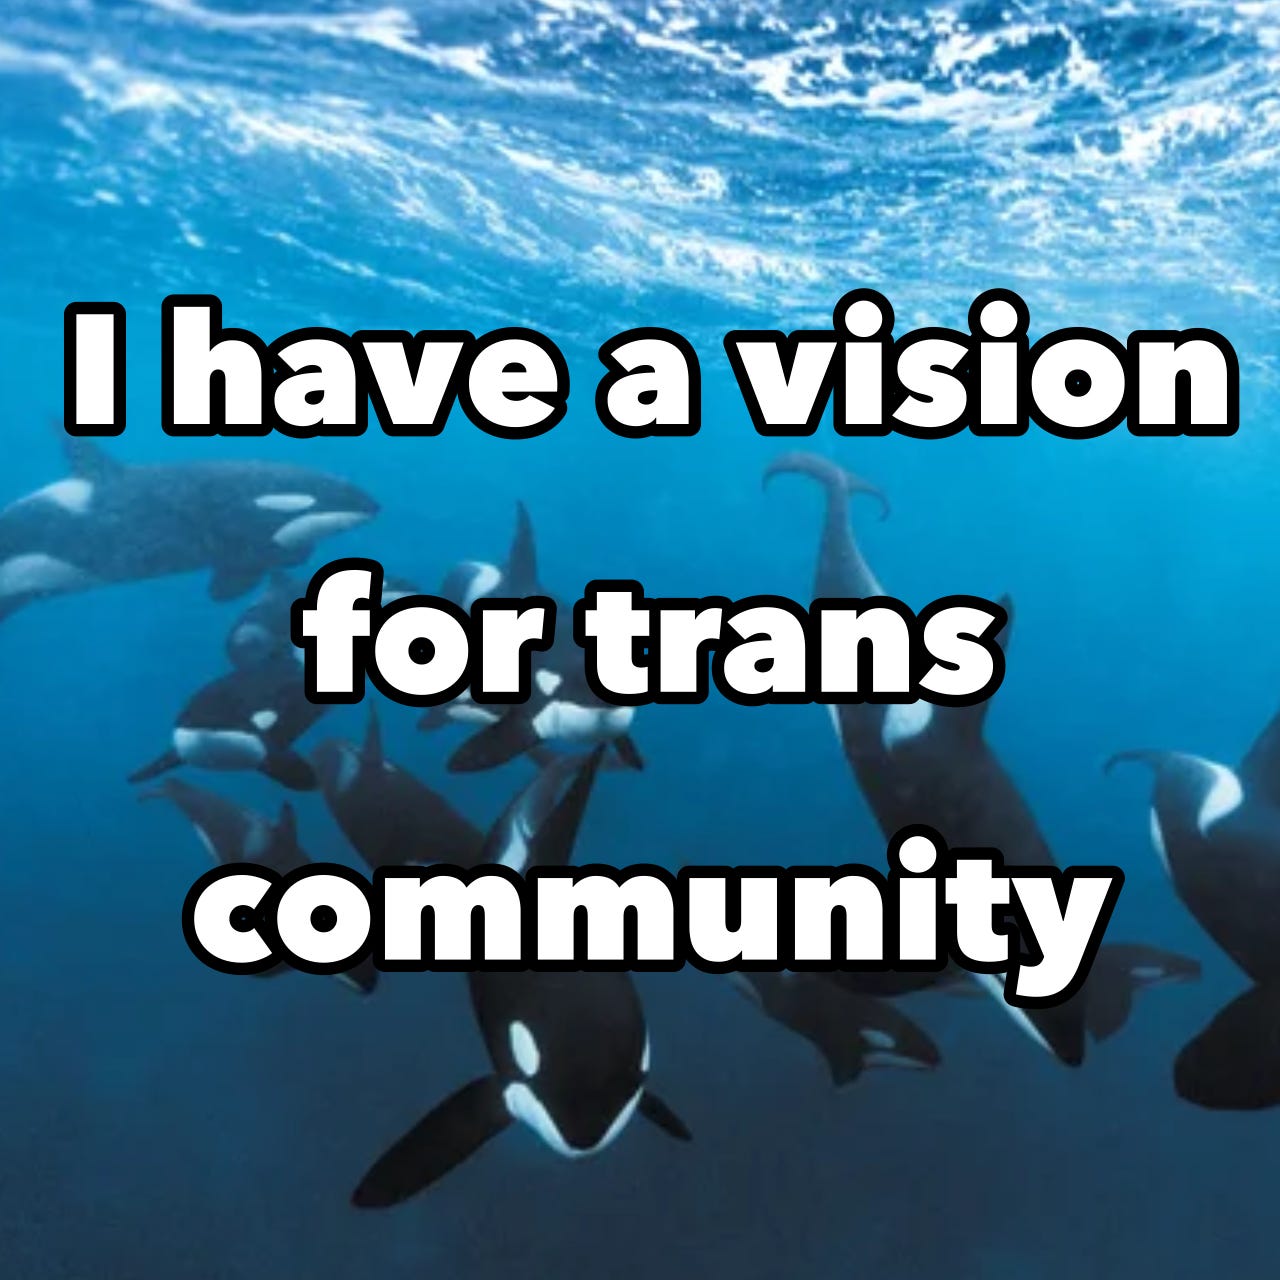 I have a vision for trans community